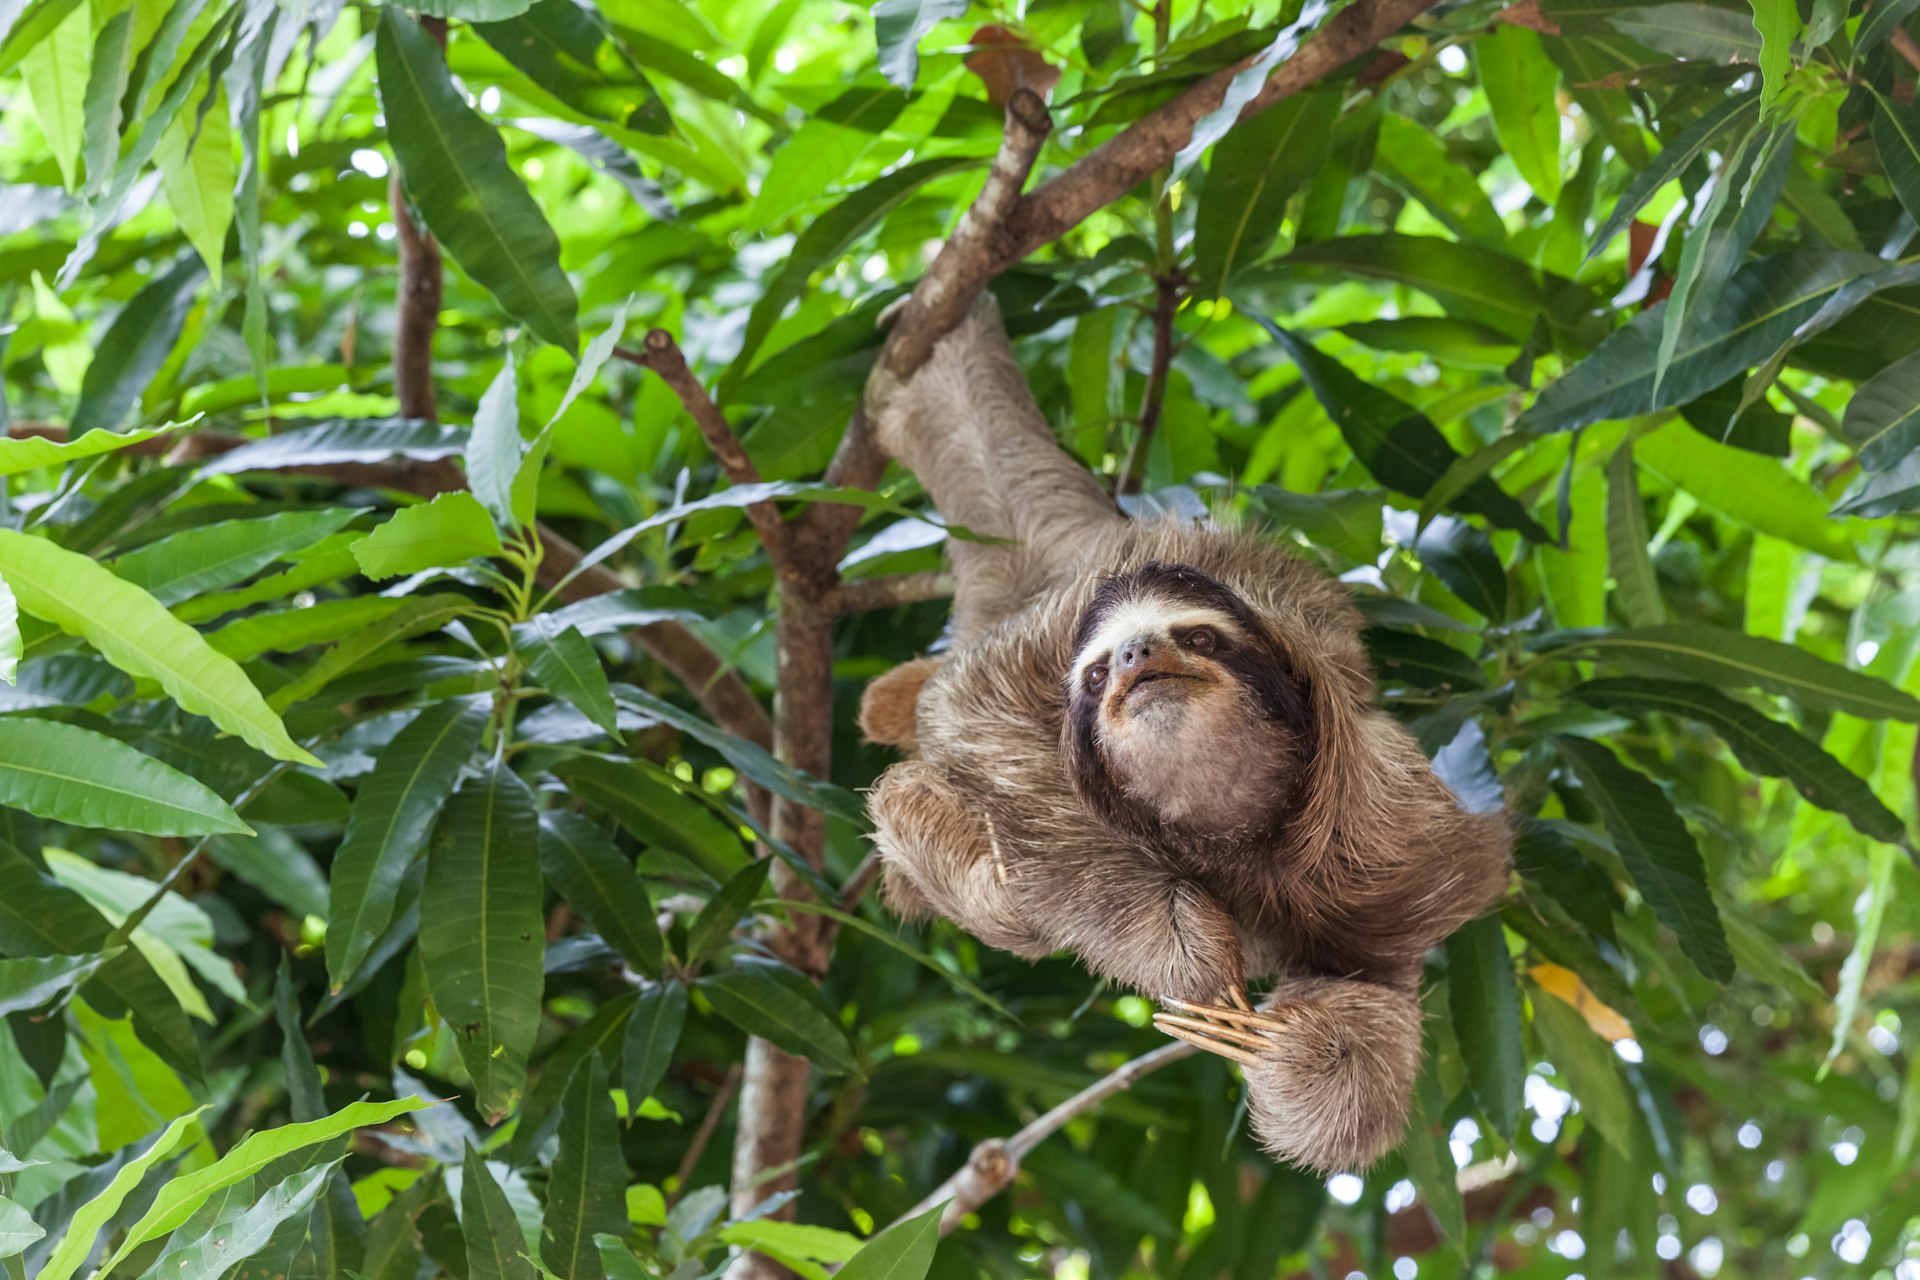 A sloth hangs in a tree in a forested area in Panama 